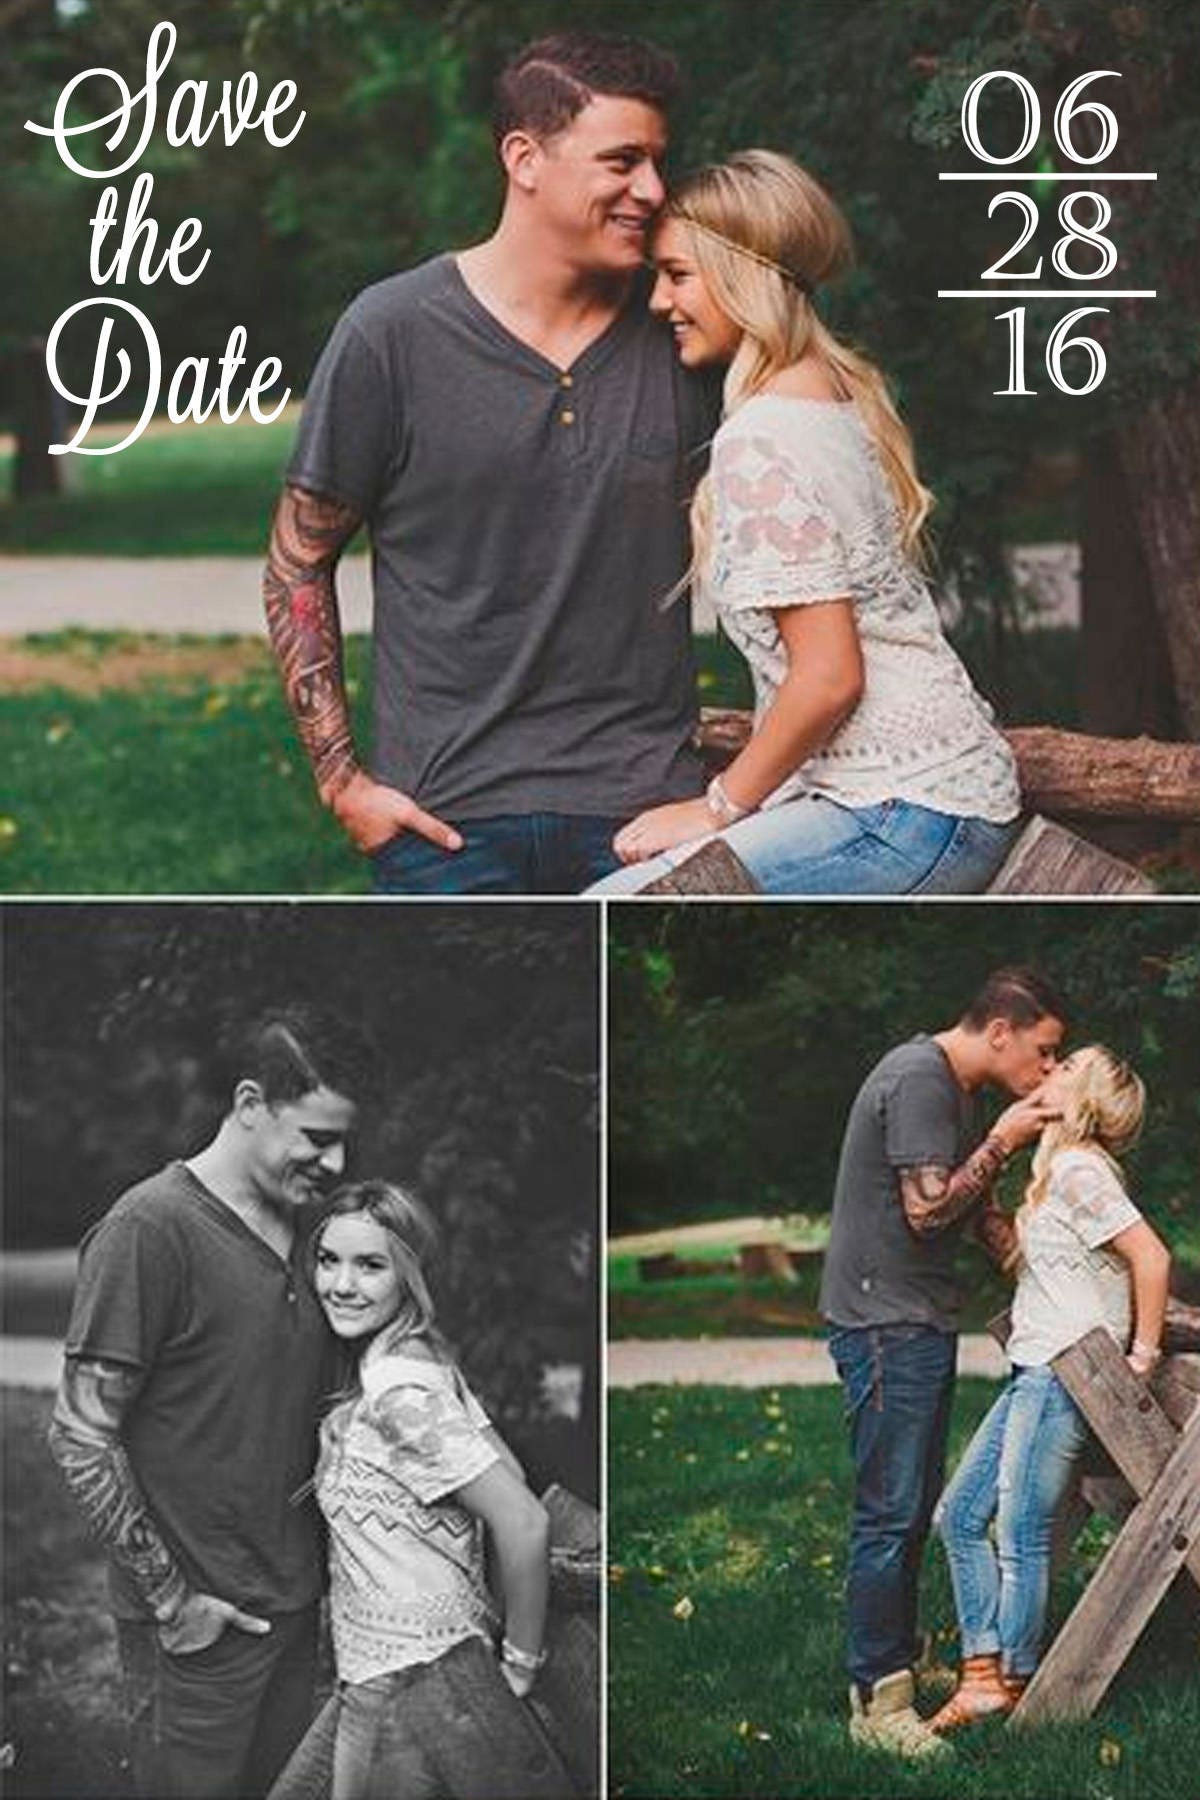 Photo Save the date Magnet, Wedding Save the Date, Photo save the date, beach save the date magnet, Save the date picture, Set of 50 magnets